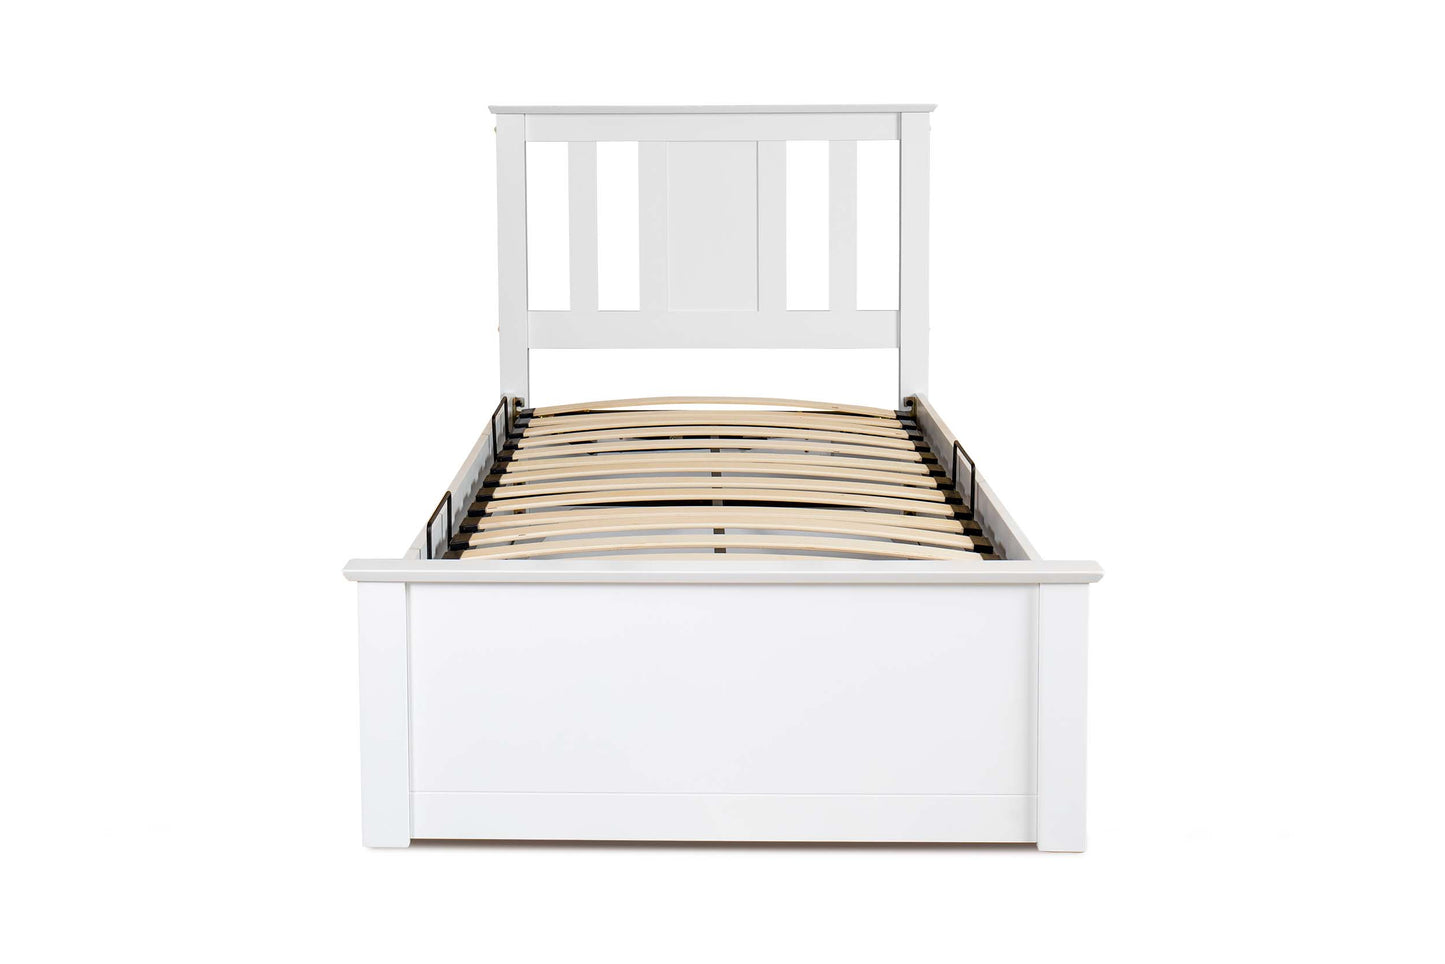 Chesterfield Ottoman Storage Bed Frame - 3ft Single - Bright White